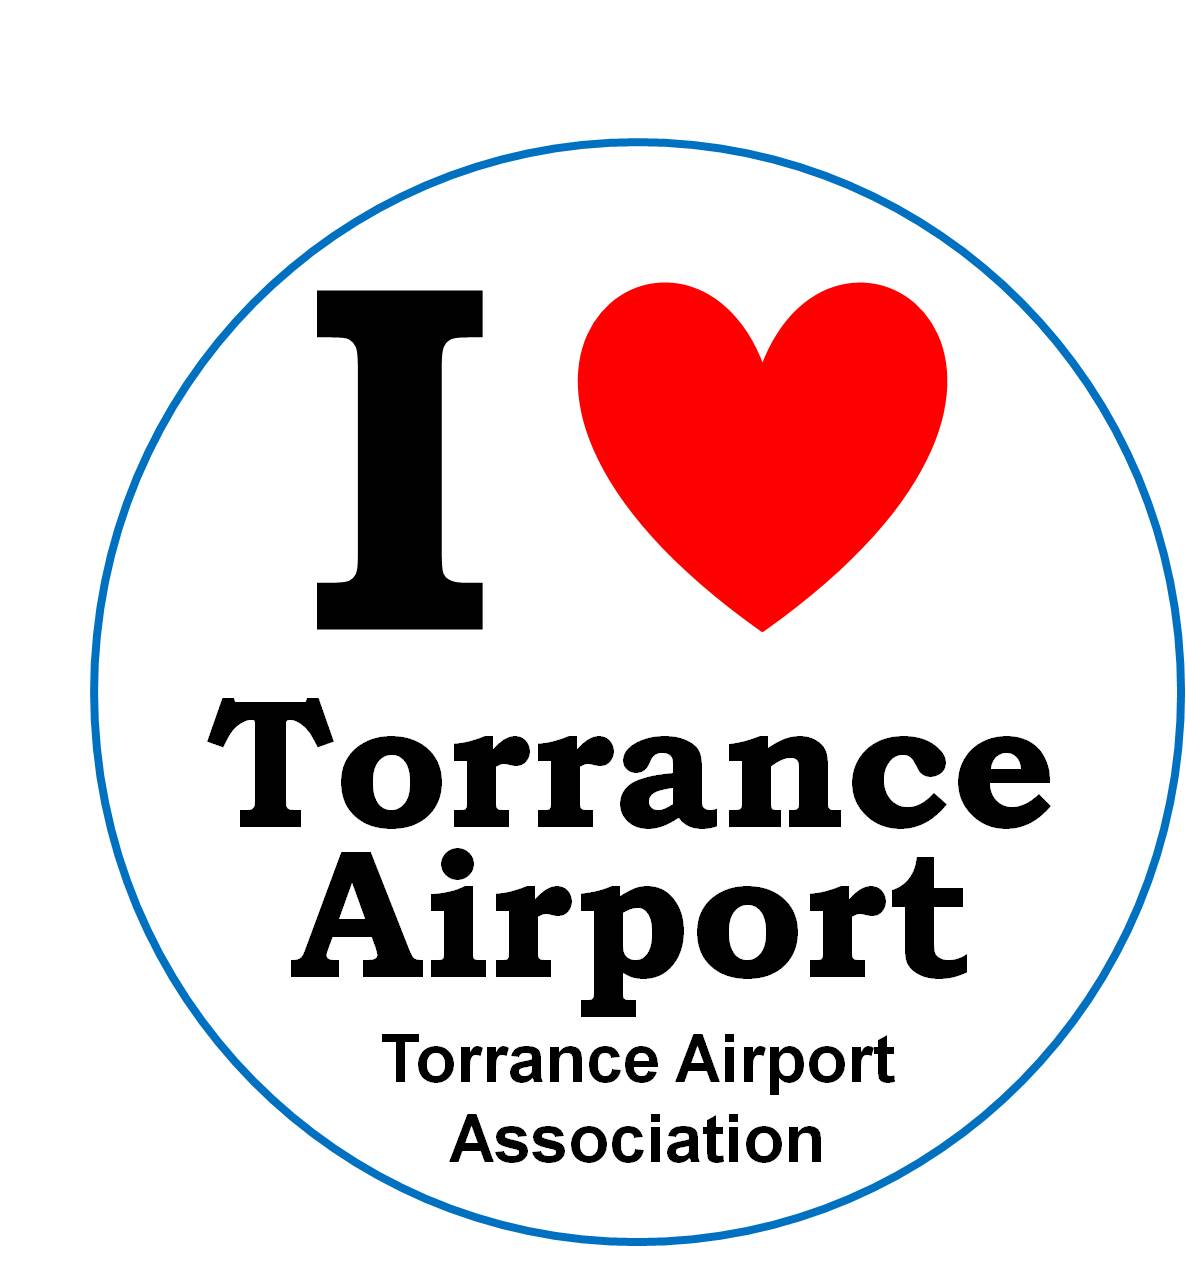 View of the Torrance Airport